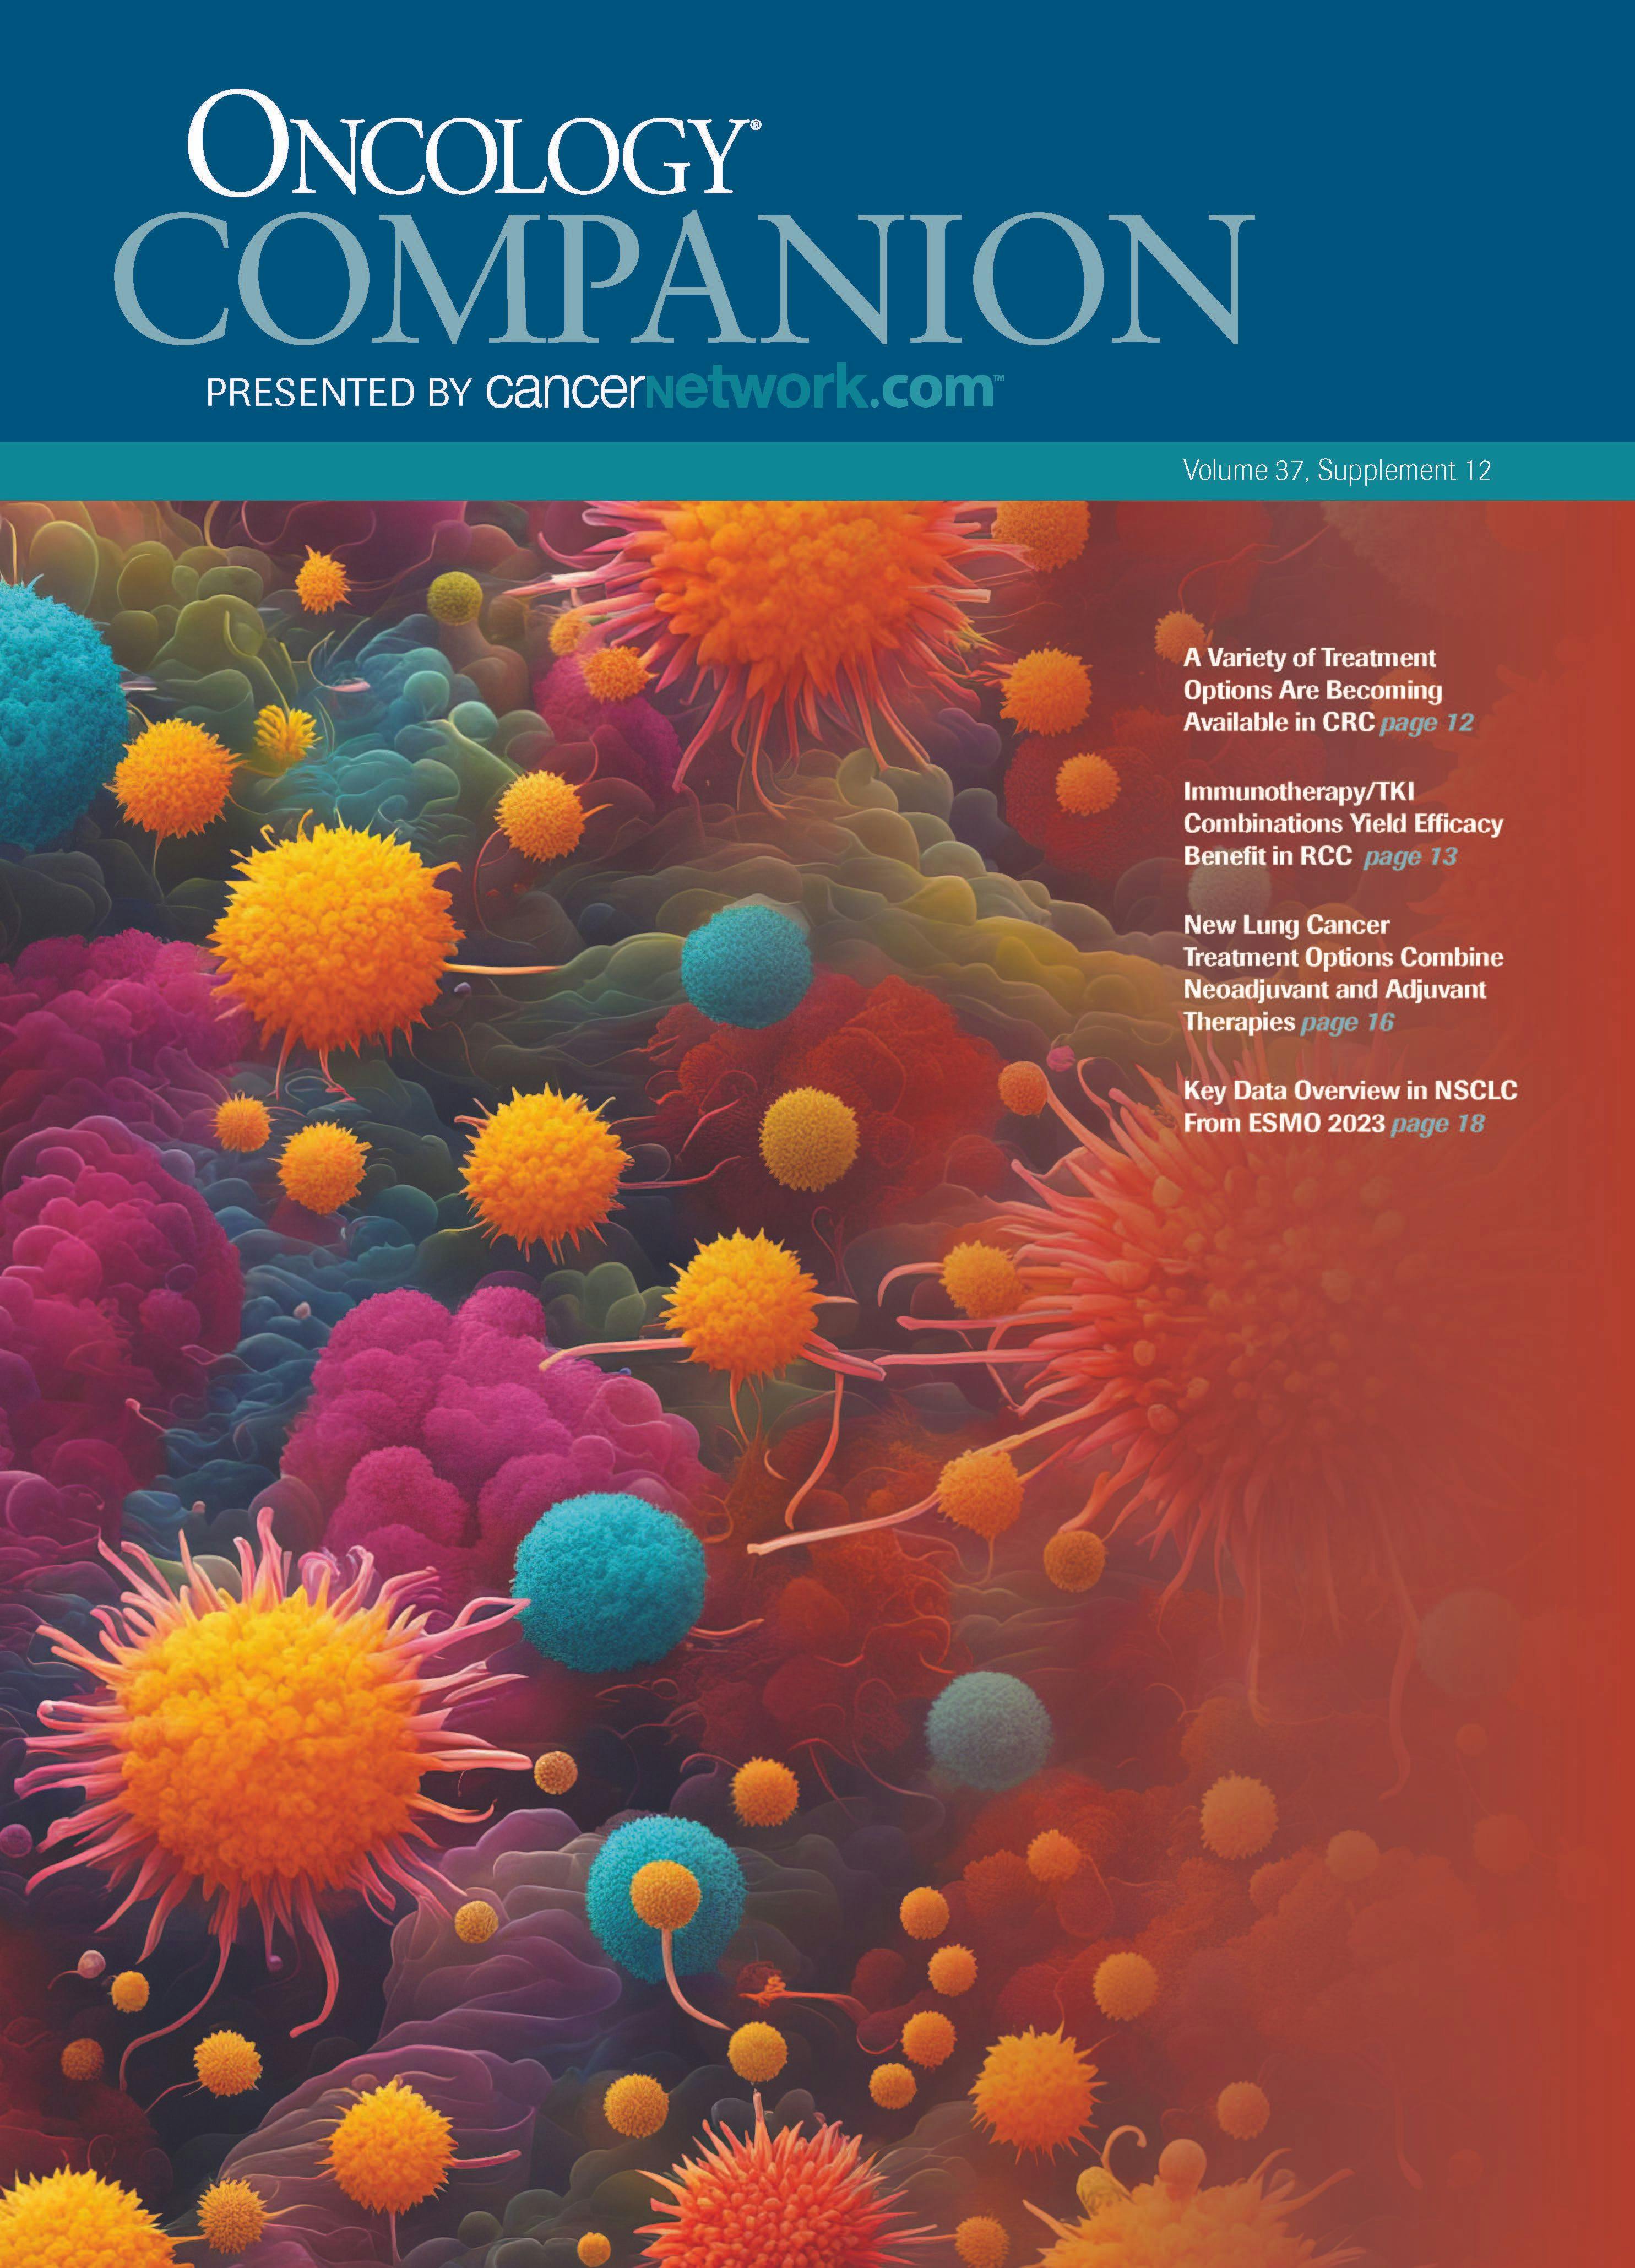 ONCOLOGY® Companion, Volume 37, Supplement 12